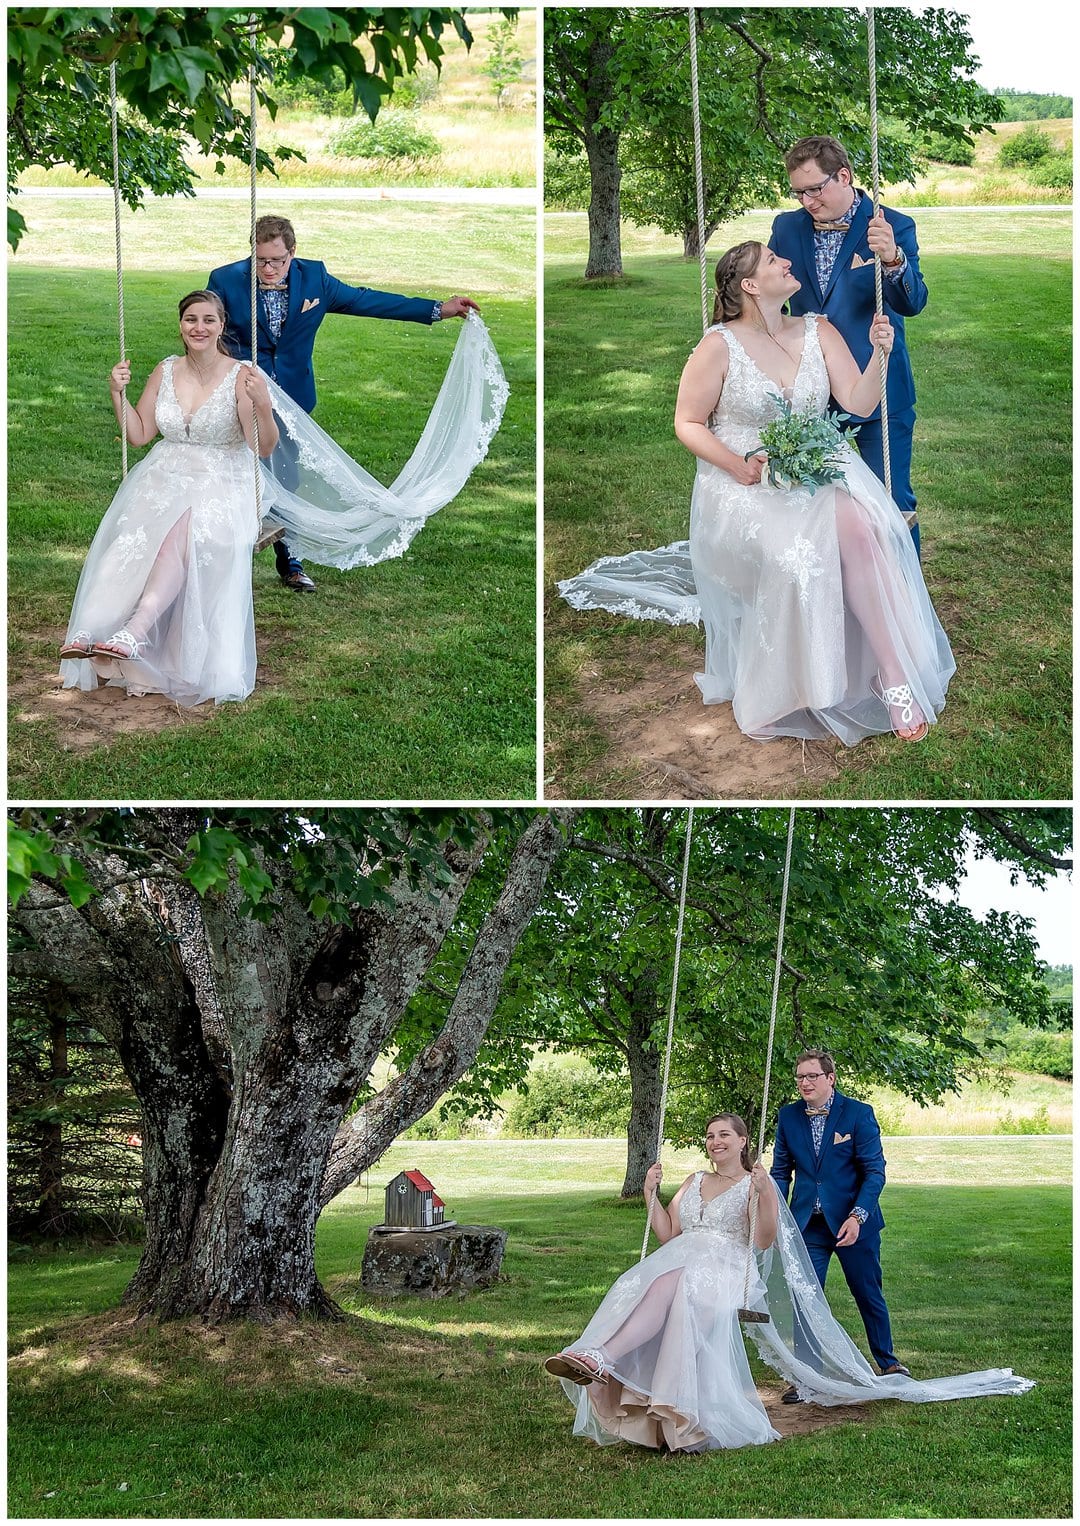 The bride and groom play on a swing during their wedding photos at the Barn at Sadie Belle Farm in Hantsport NS.